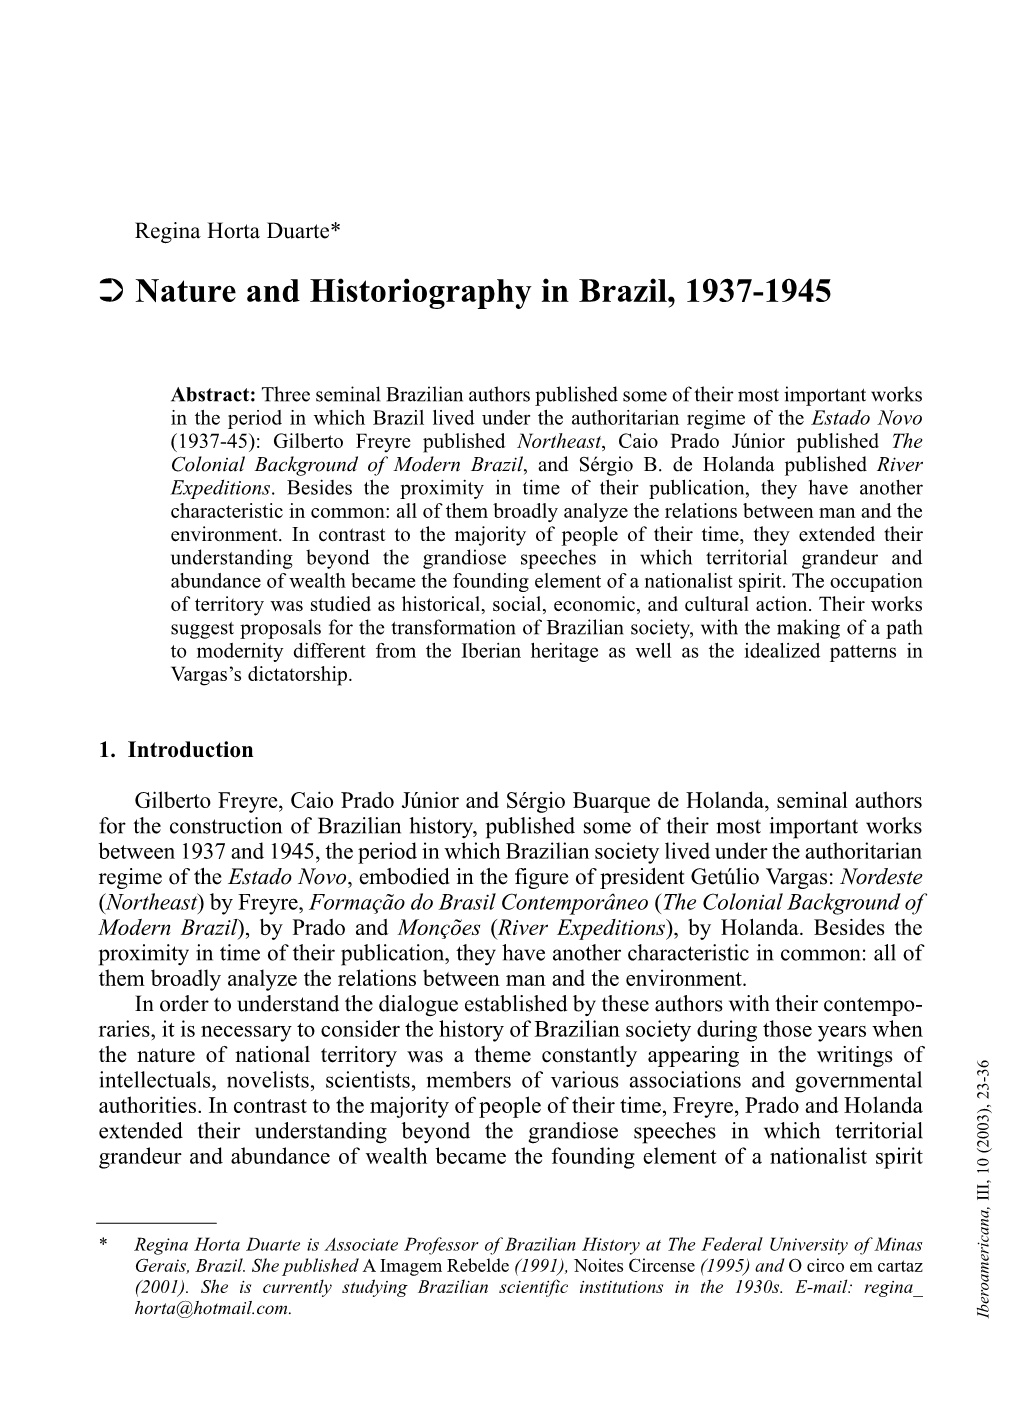 Nature and Historiography in Brazil, 1937-1945